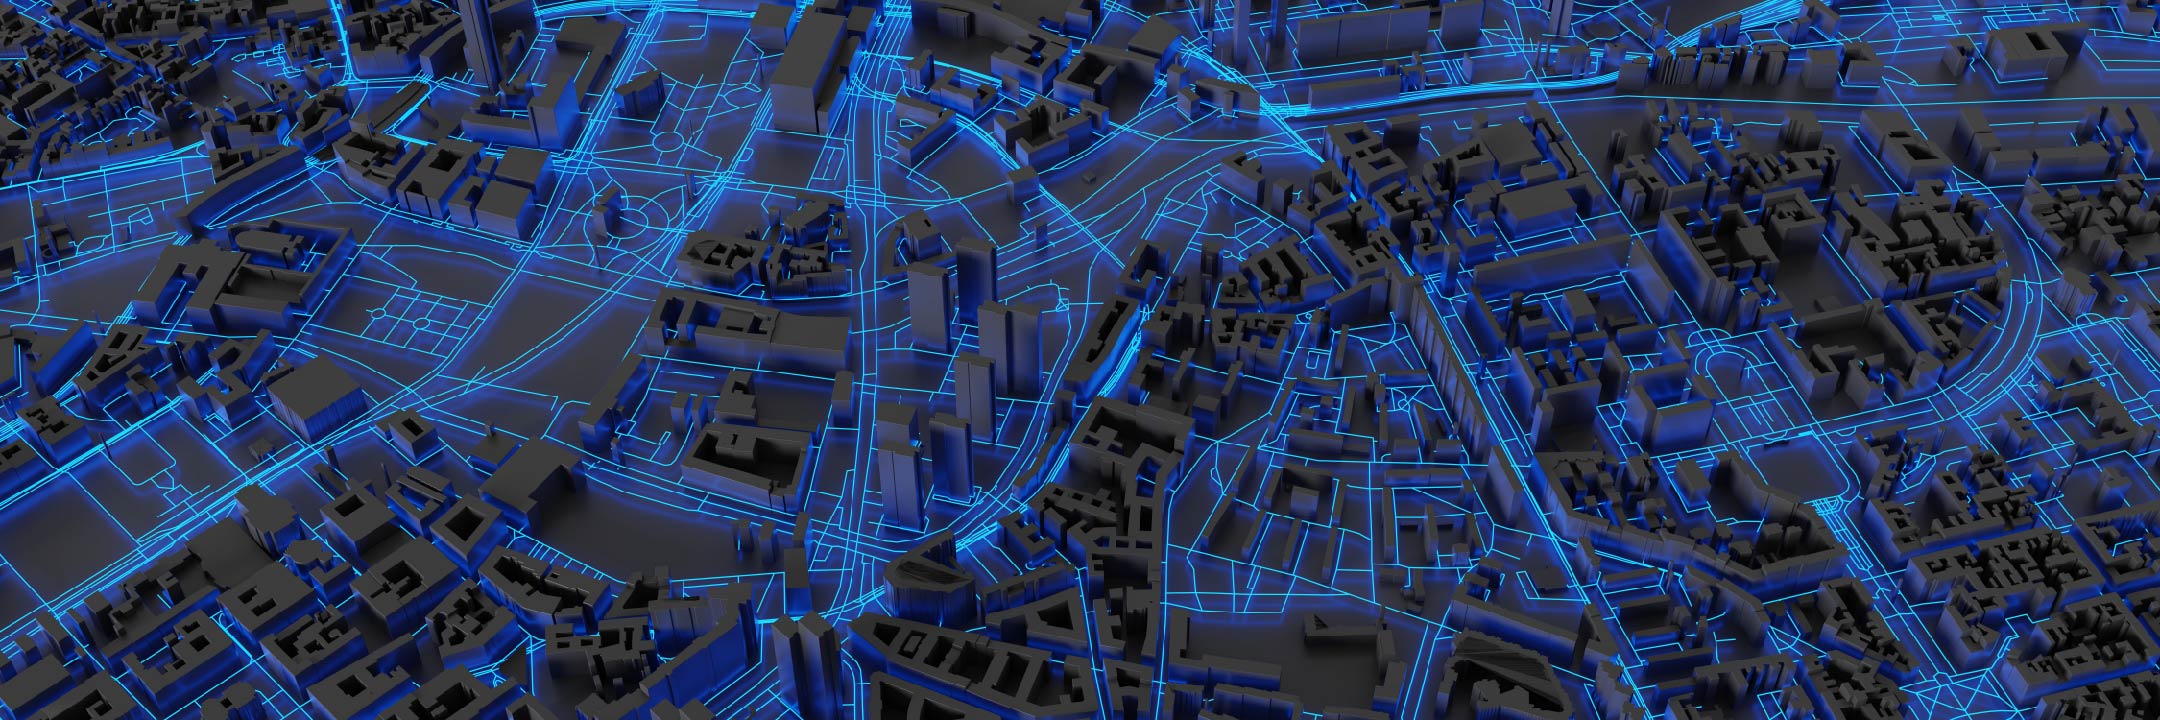 Image of black city buildings from birds eye view with neon blue tech lines running through